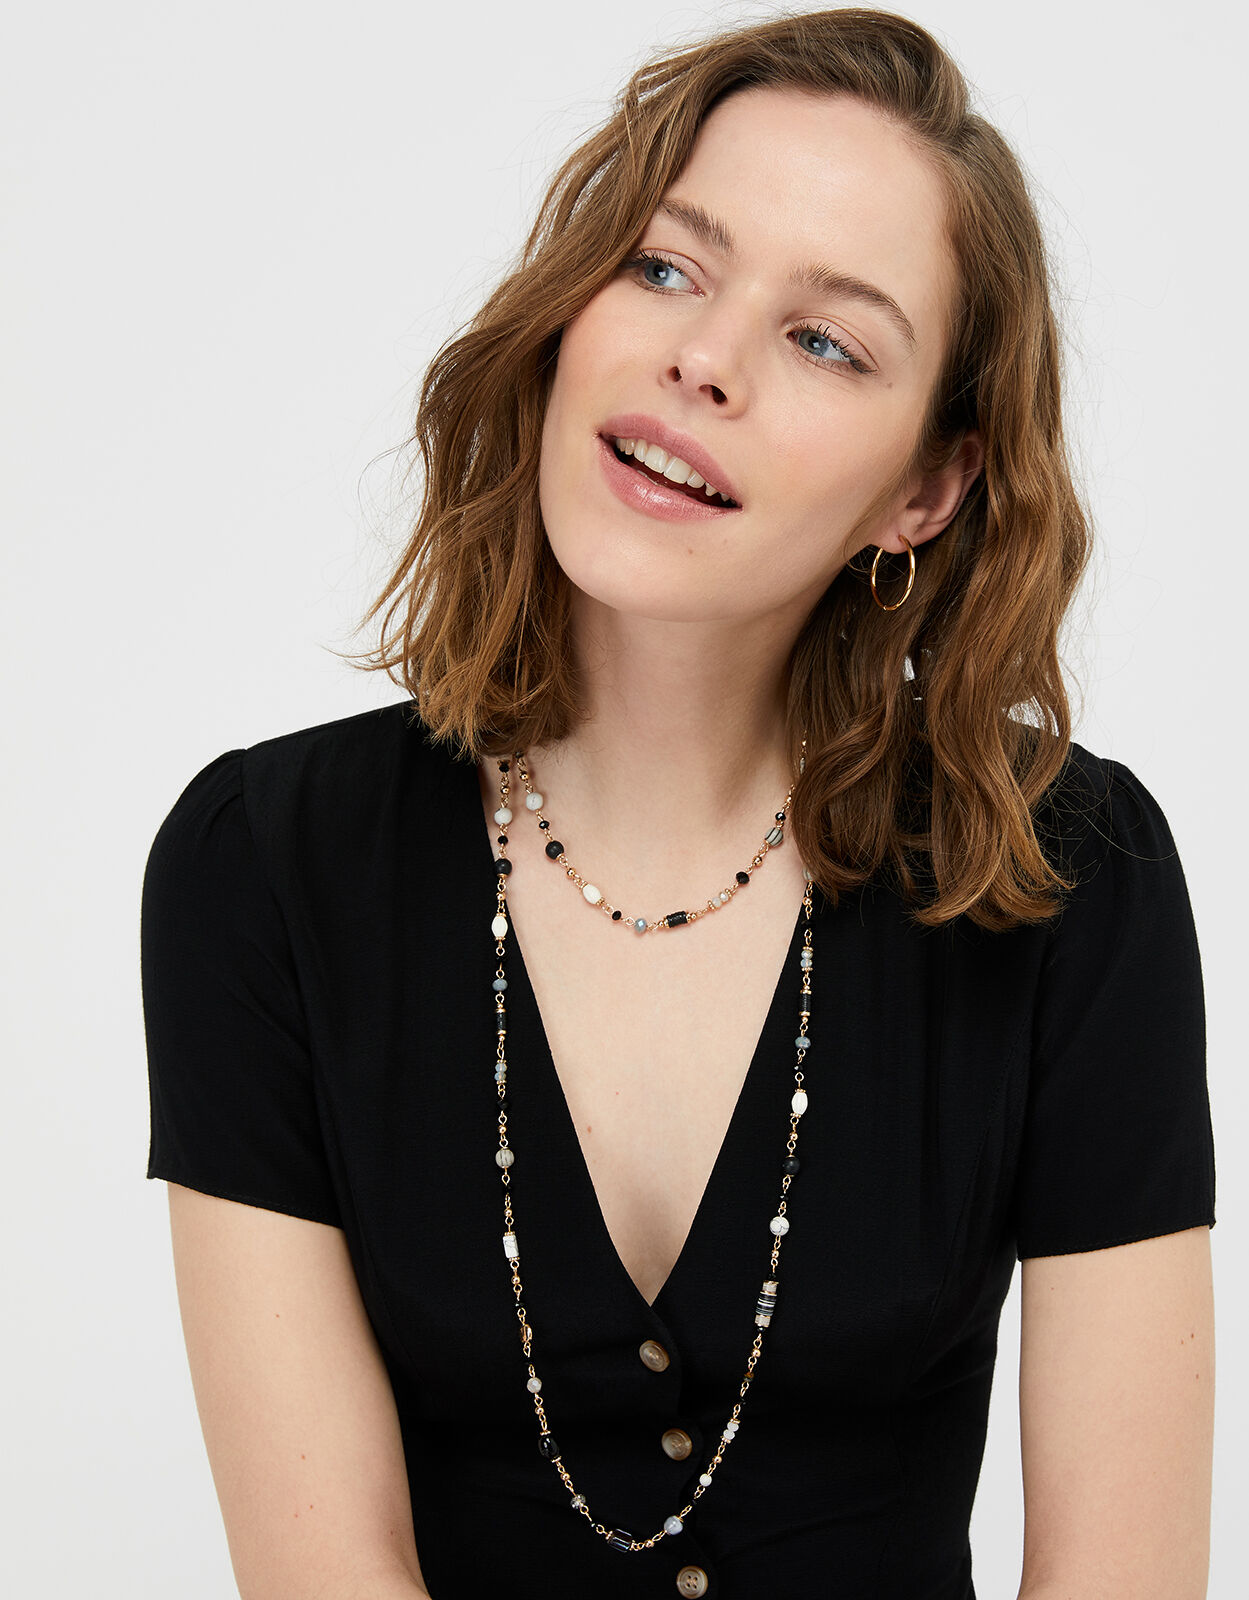 sterling silver jewellery york Boho Fashion Jewellery: 96cm Long Gold  Necklace with Worn Metallic Circles and Coins and Black and Grey Beads  (EV5)A) Sterling silver jewellery range of Fashion and costume and